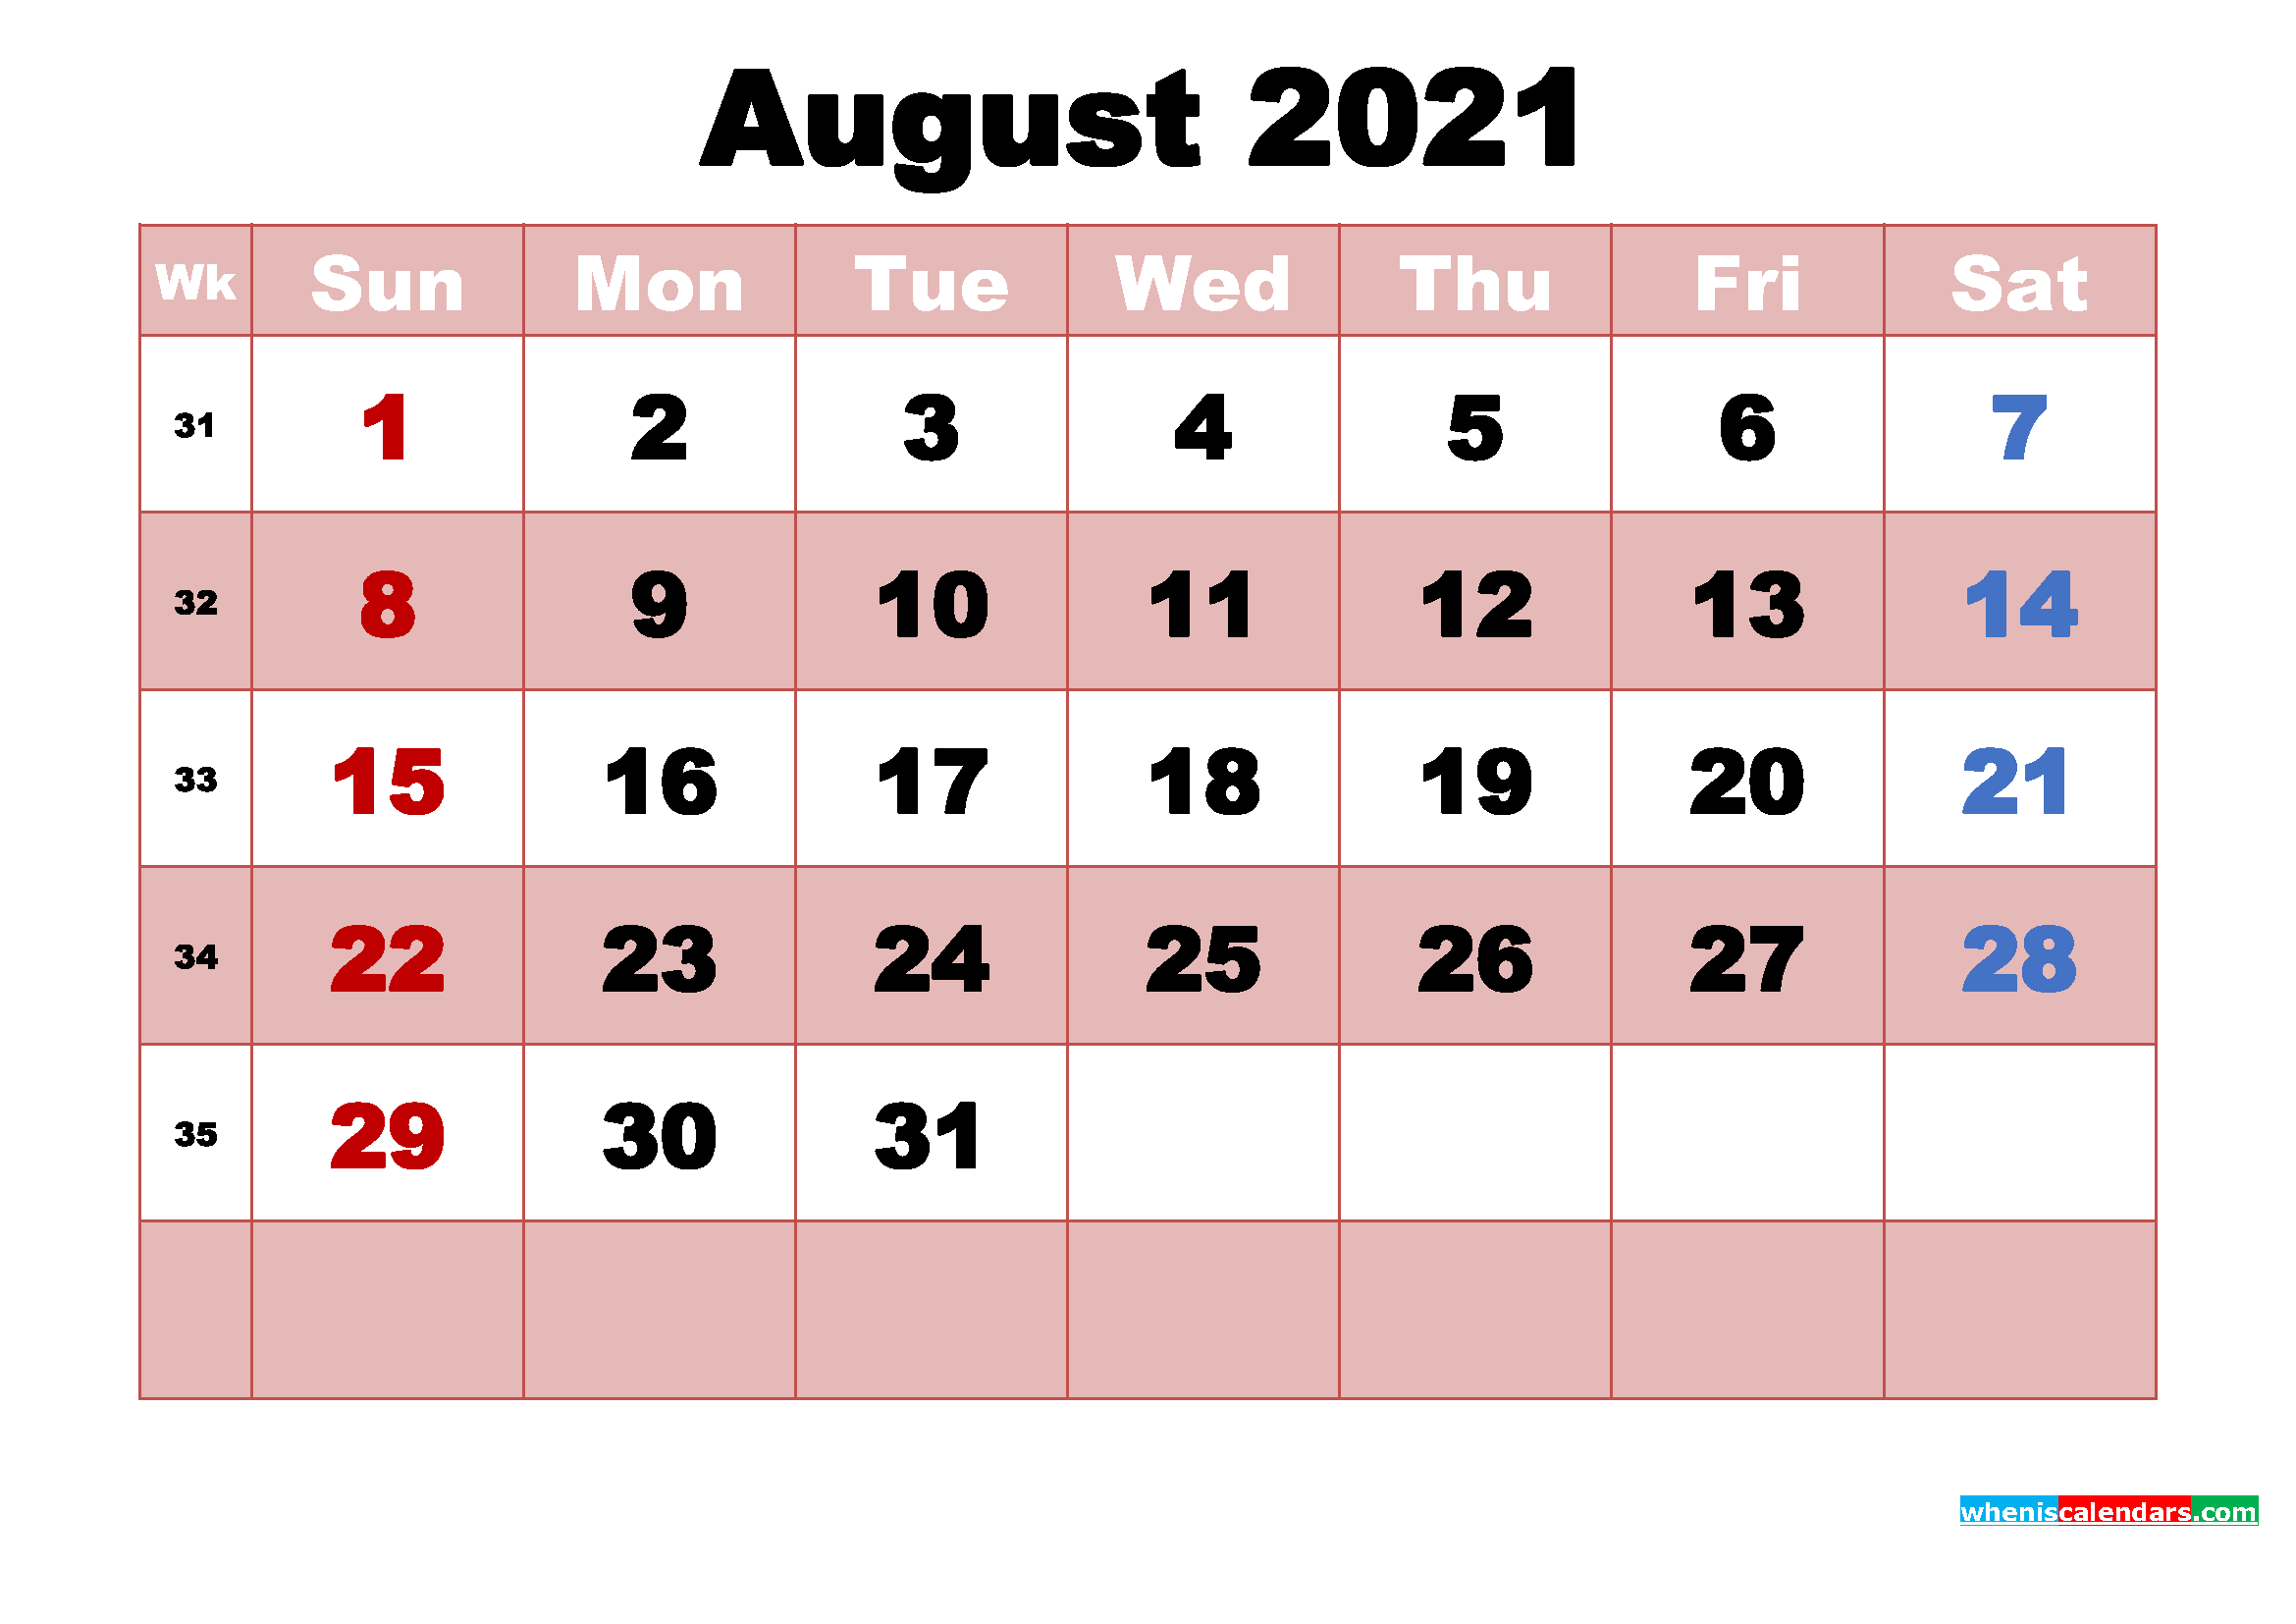 August 2021 Printable Monthly Calendar with Holidays